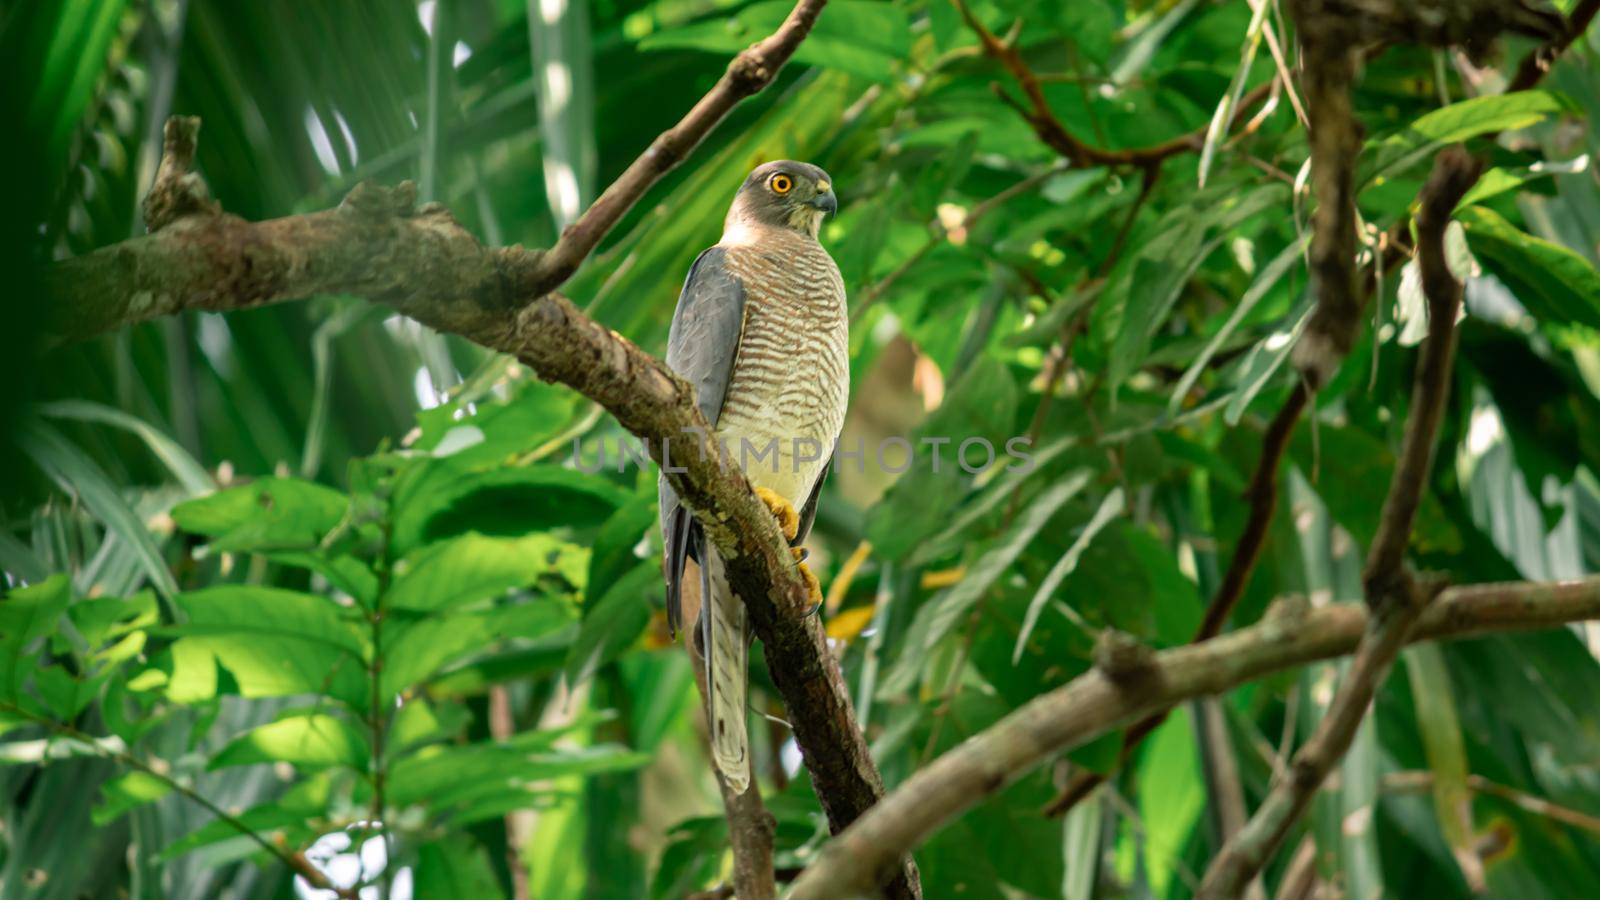 The Shikra is a small predatorial bird, perched and resting under the shade of the forest. by nilanka